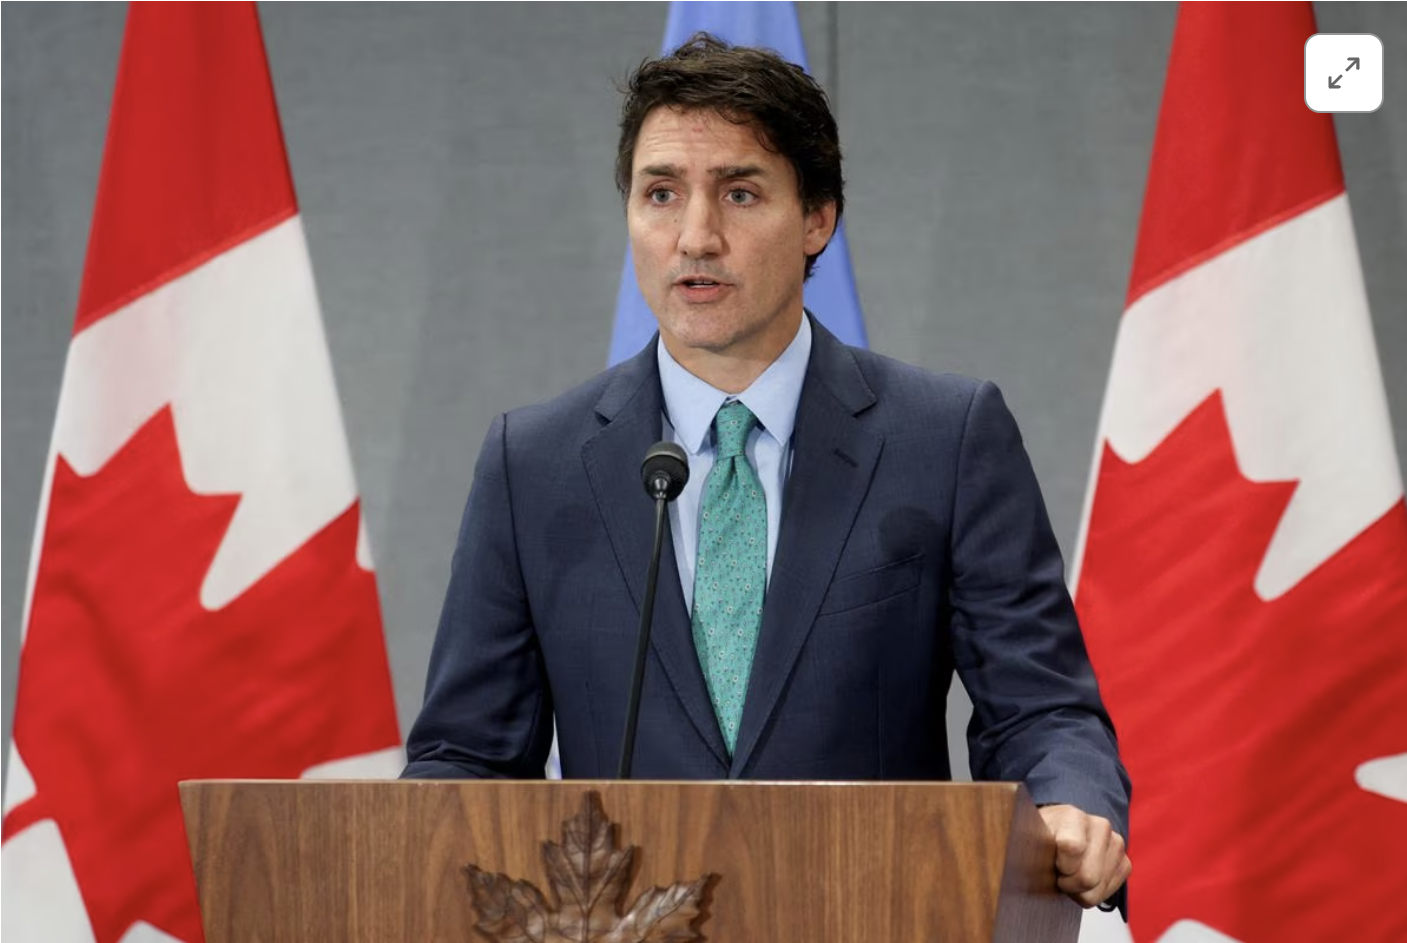 canadian prime minister justin trudeau holds a press conference on the sidelines of the unga in new york us september 21 2023 amid escalating tensions following canada s announcement that it was actively pursuing credible allegations linking indian government agents to the murder of a sikh separatist leader in june photo reuters